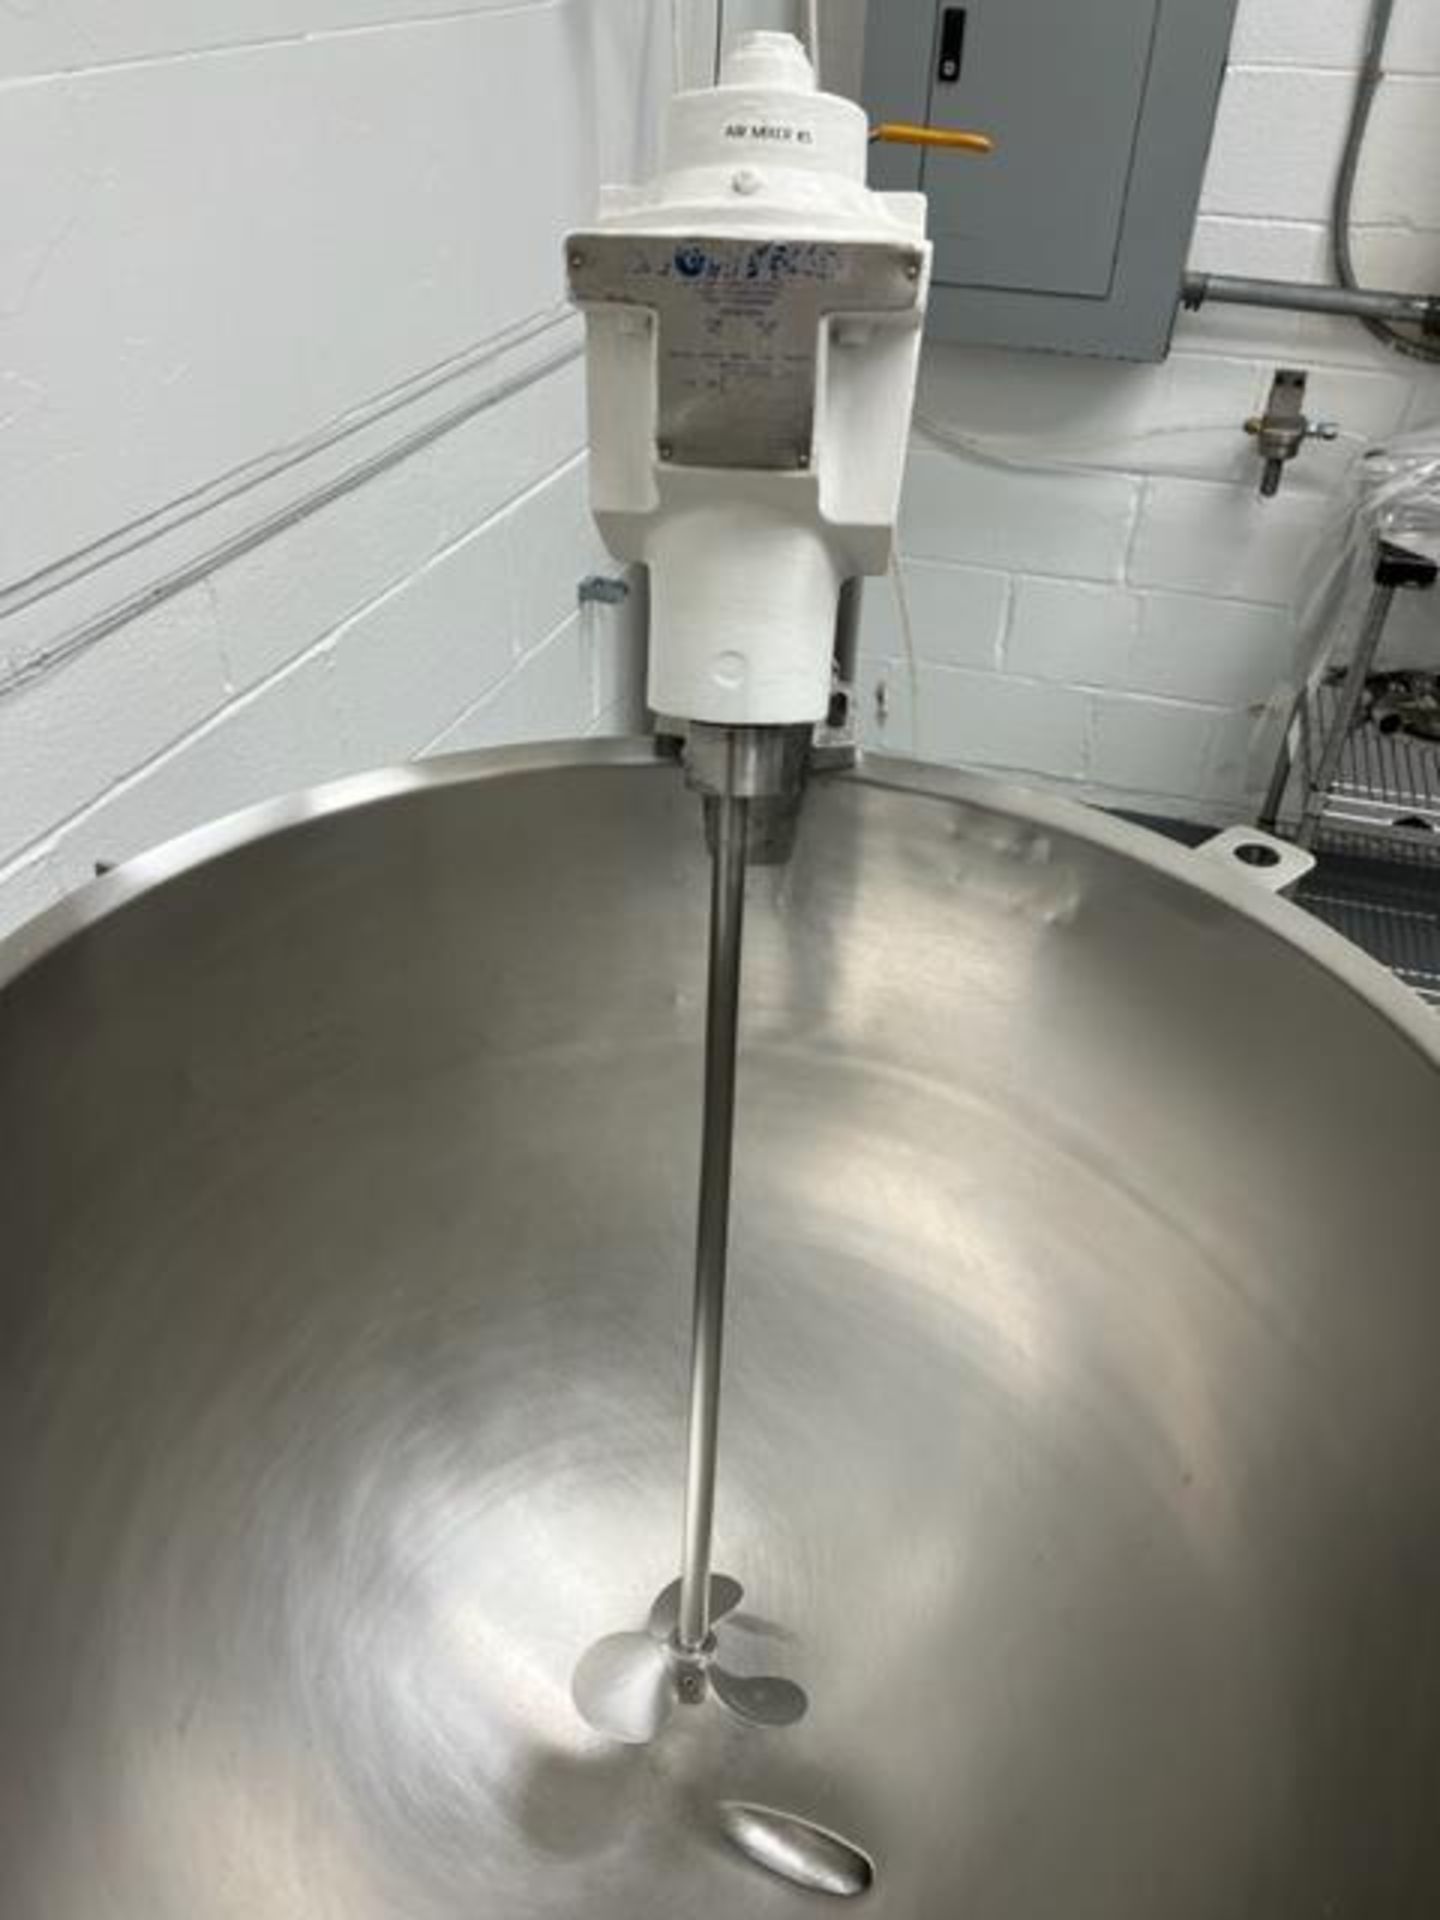 Asset 101 - Garland 60 gallon SS Jacketed Cooking kettle with Lightnin Mixer, 25 psi, - Image 2 of 6